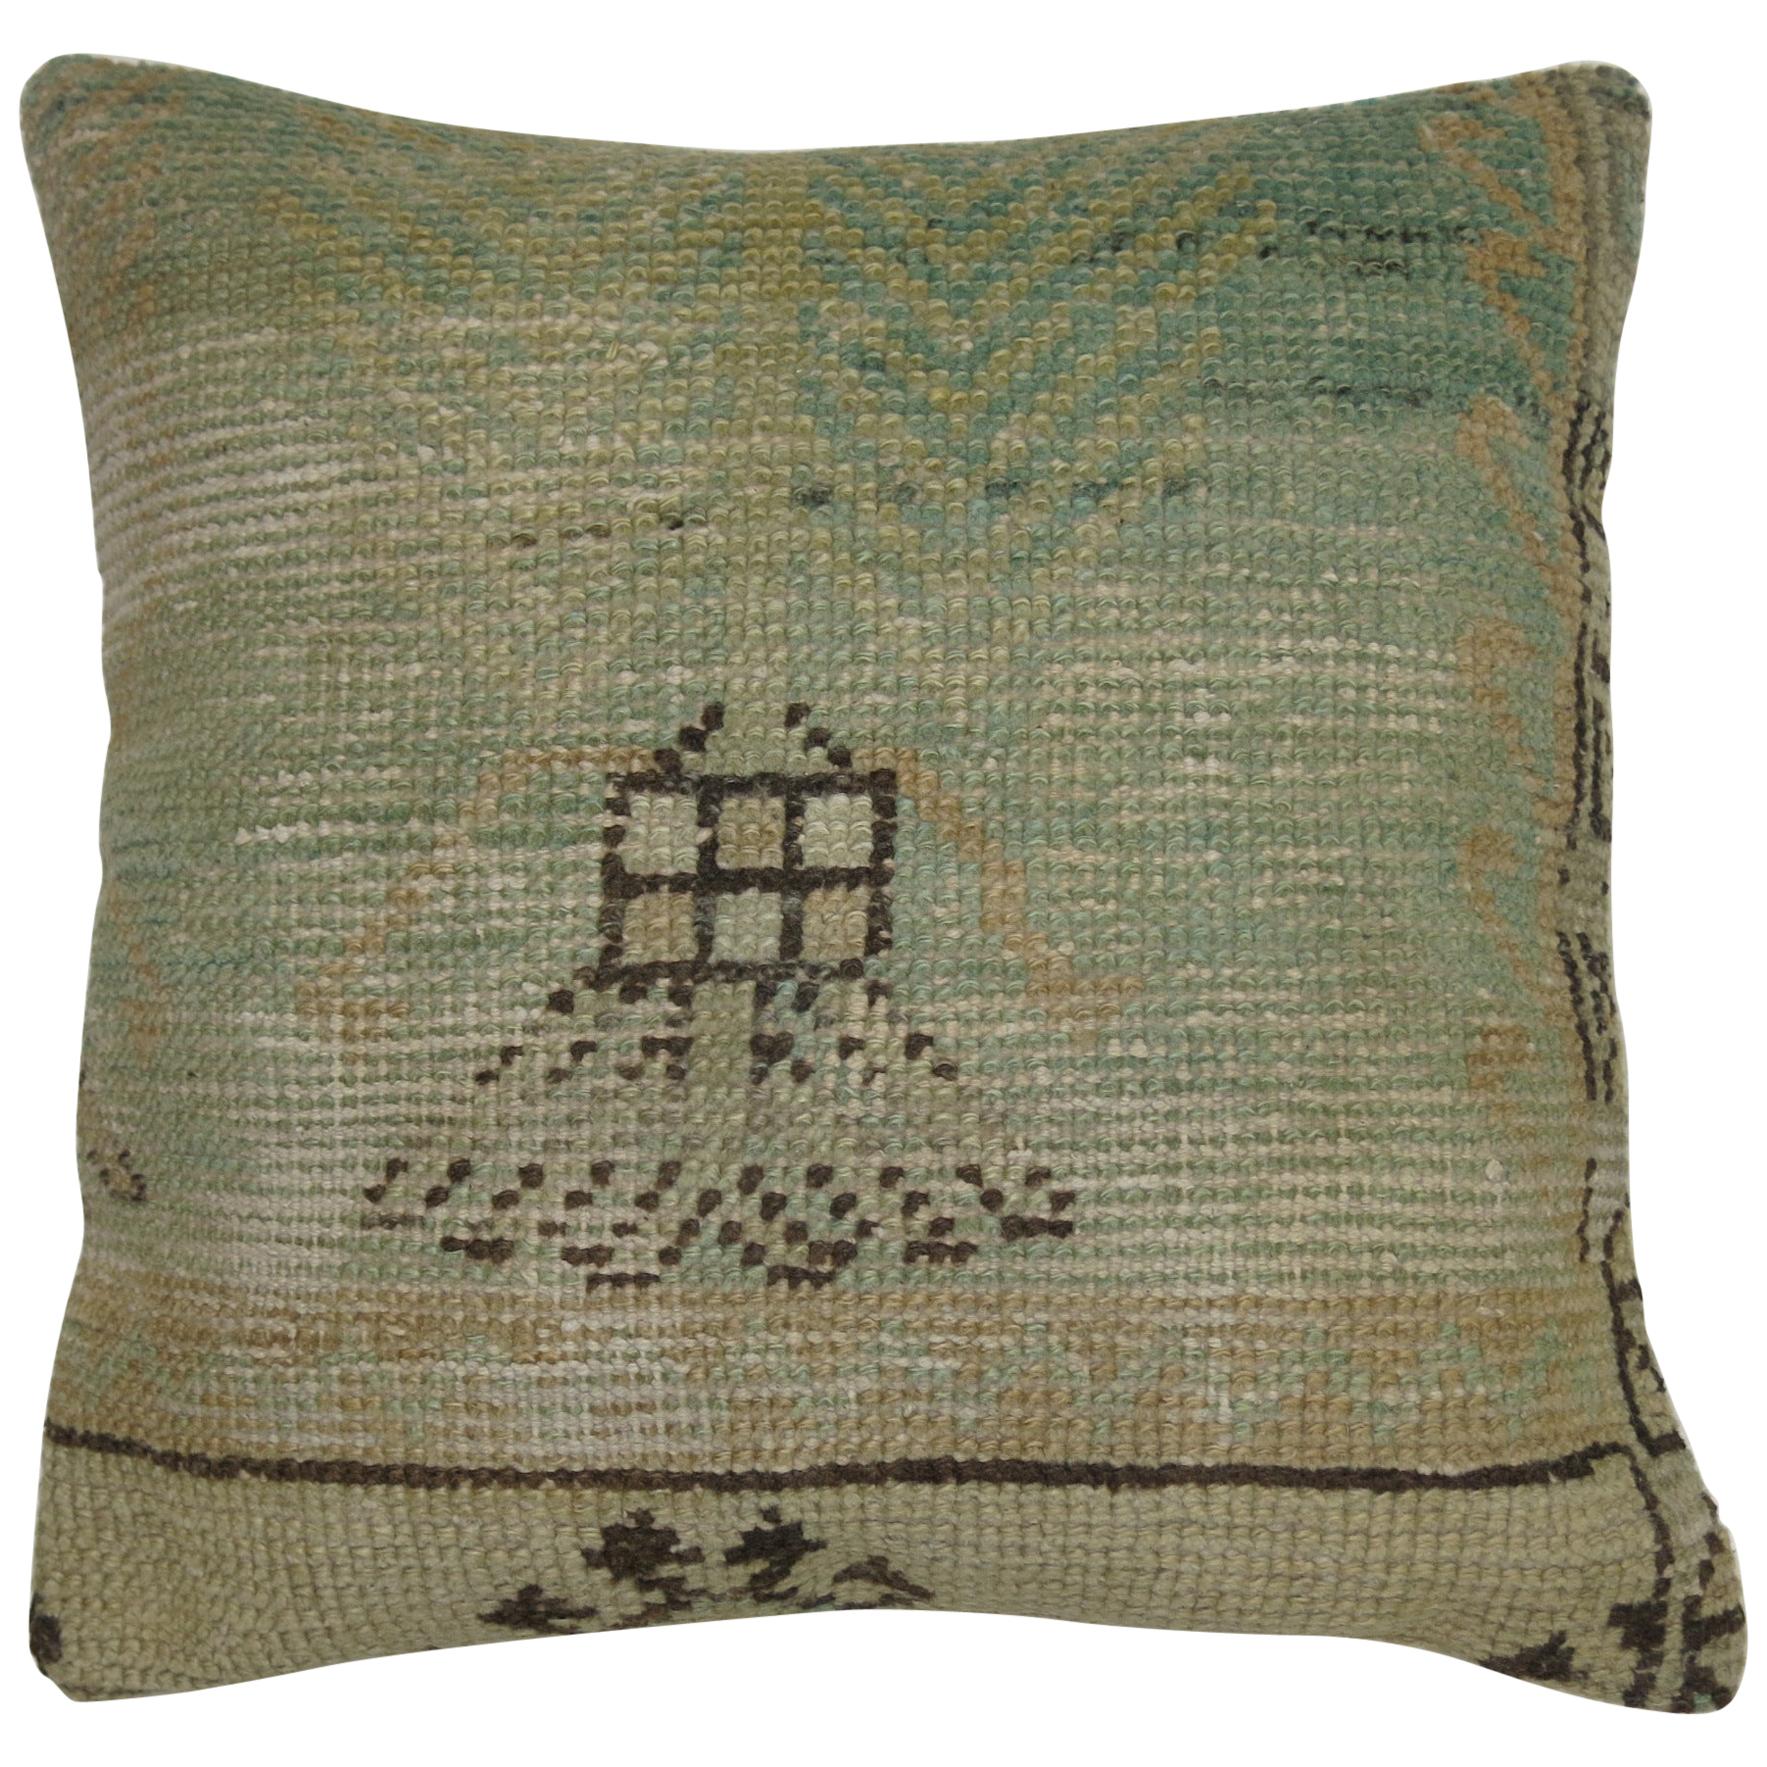 Light Green and Beige Vintage Rug Pillow